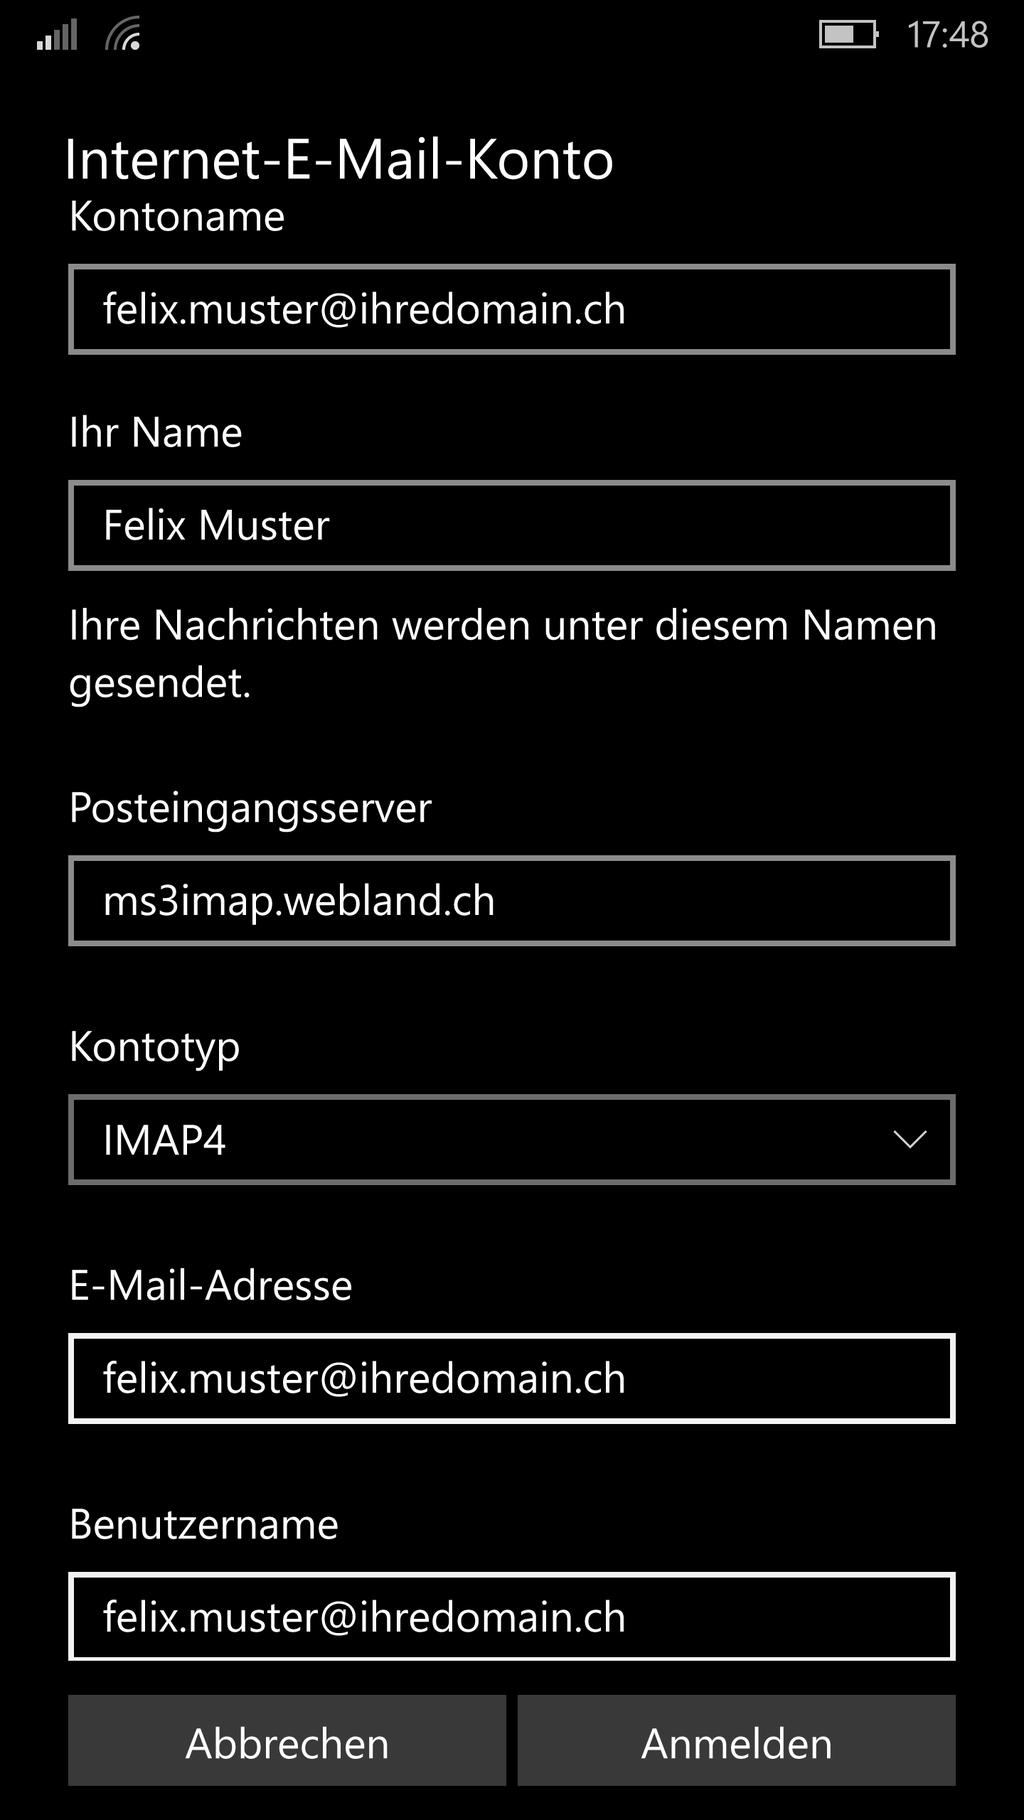 Under Account name and Your name enter your name (selectable). Under Incoming mail server enter ***imap.yourdomain.ch (replace ***imap.yourdomain.ch with your server address, e.g. ms3imap.webland.